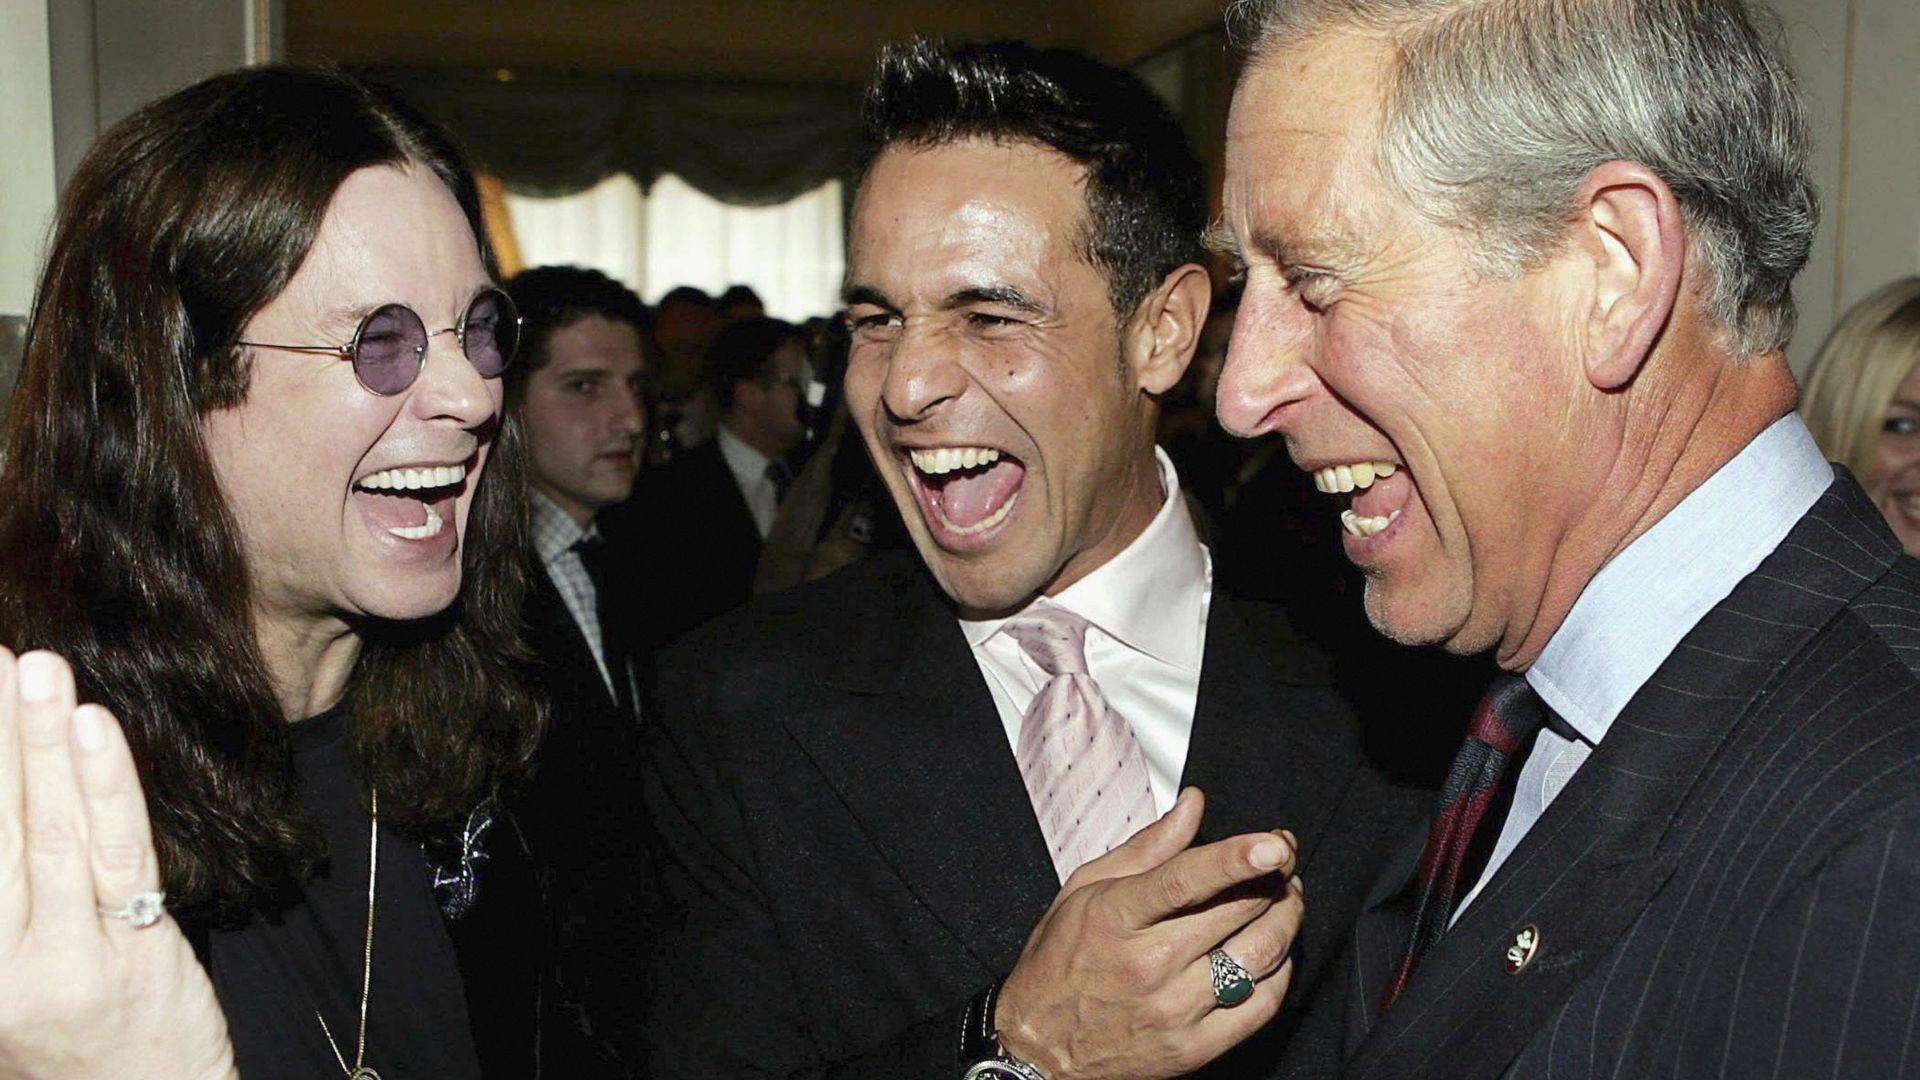 <p>                     In a shot taken in 2006 at an event marking the Prince’s Trust's 30th birthday, King Charles is seen laughing his head off with Black Sabbath frontman Ozzy Osbourne, as well as singer Chico. The King and Ozzy reportedly get along very well with the King sending Ozzy a bottle of scotch after his infamous quad biking incident.                   </p>